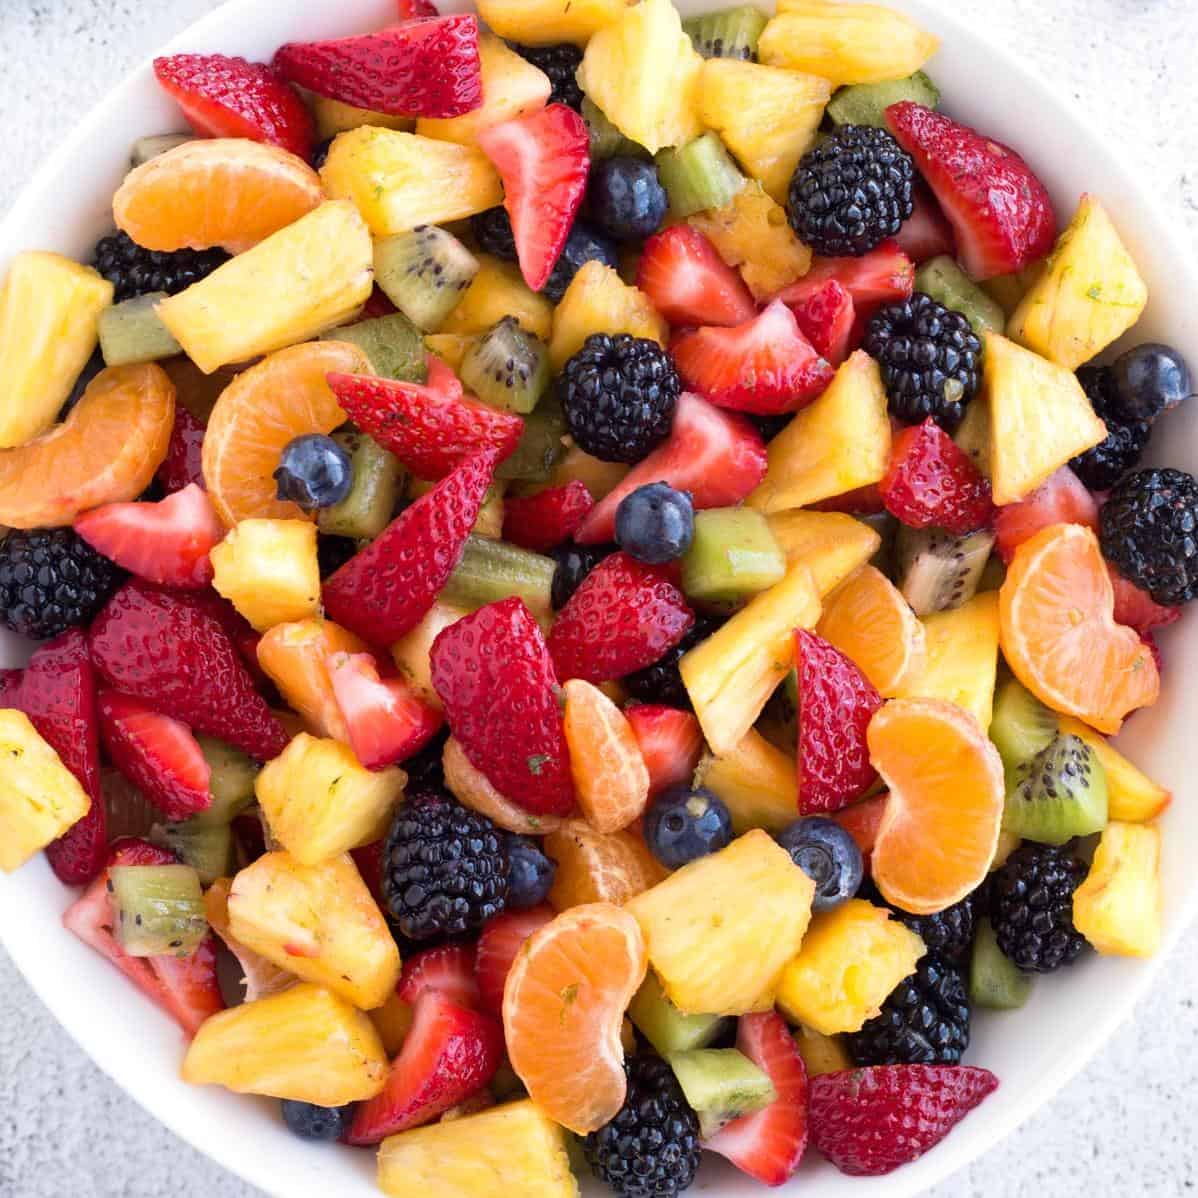  A colorful mix of fruits to brighten up your camping trip.